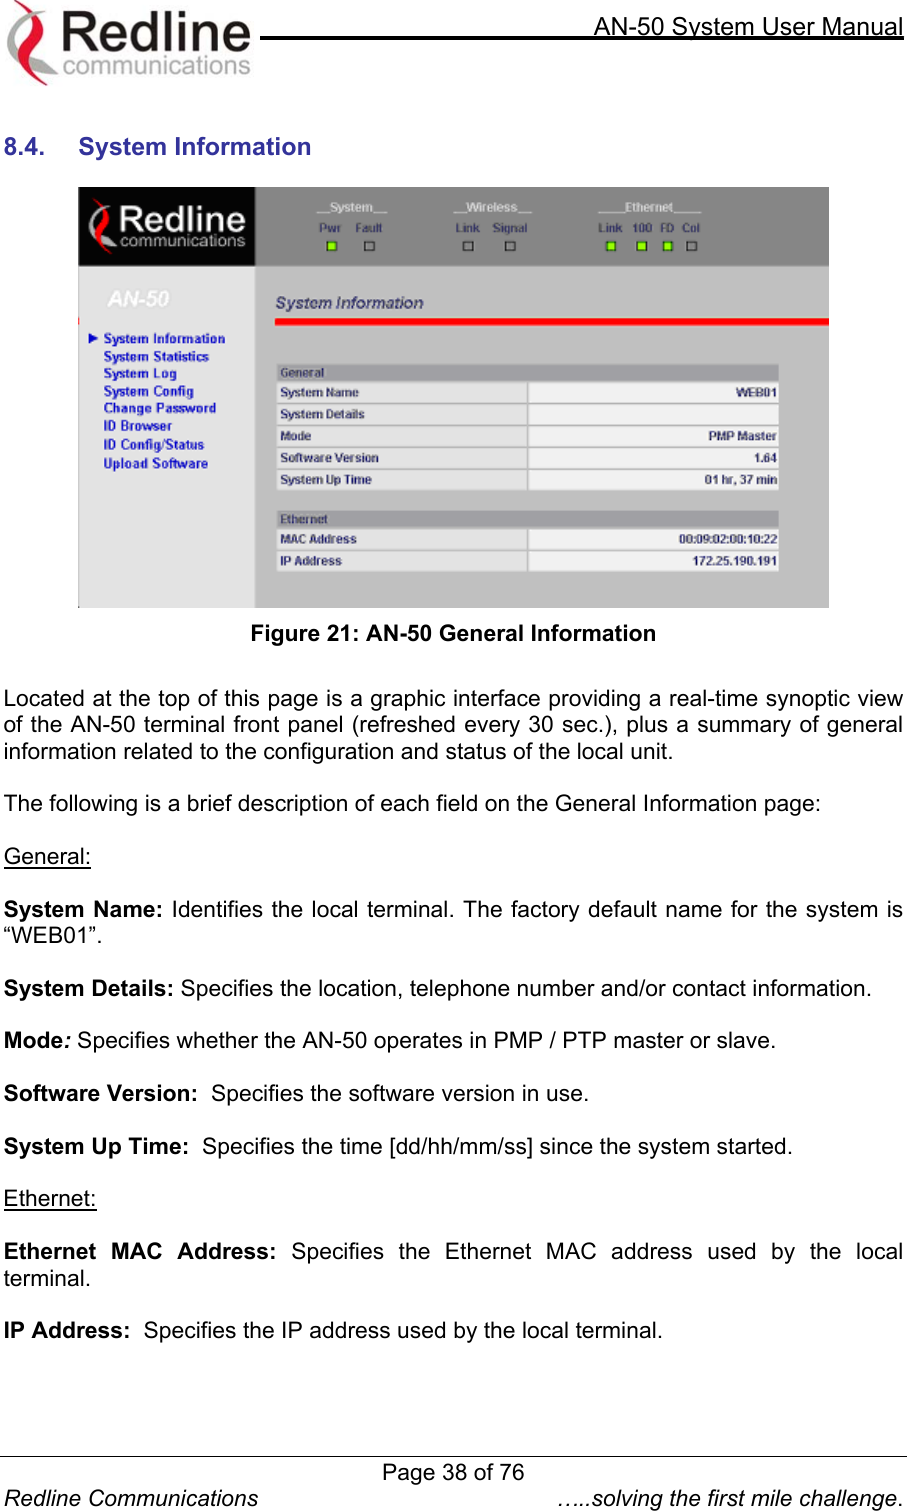     AN-50 System User Manual  Redline Communications  …..solving the first mile challenge.  8.4.  System Information    Figure 21: AN-50 General Information  Located at the top of this page is a graphic interface providing a real-time synoptic view of the AN-50 terminal front panel (refreshed every 30 sec.), plus a summary of general information related to the configuration and status of the local unit.   The following is a brief description of each field on the General Information page:  General:  System Name: Identifies the local terminal. The factory default name for the system is “WEB01”.  System Details: Specifies the location, telephone number and/or contact information.  Mode: Specifies whether the AN-50 operates in PMP / PTP master or slave.  Software Version:  Specifies the software version in use.  System Up Time:  Specifies the time [dd/hh/mm/ss] since the system started.  Ethernet:  Ethernet MAC Address: Specifies the Ethernet MAC address used by the local terminal.  IP Address:  Specifies the IP address used by the local terminal.  Page 38 of 76